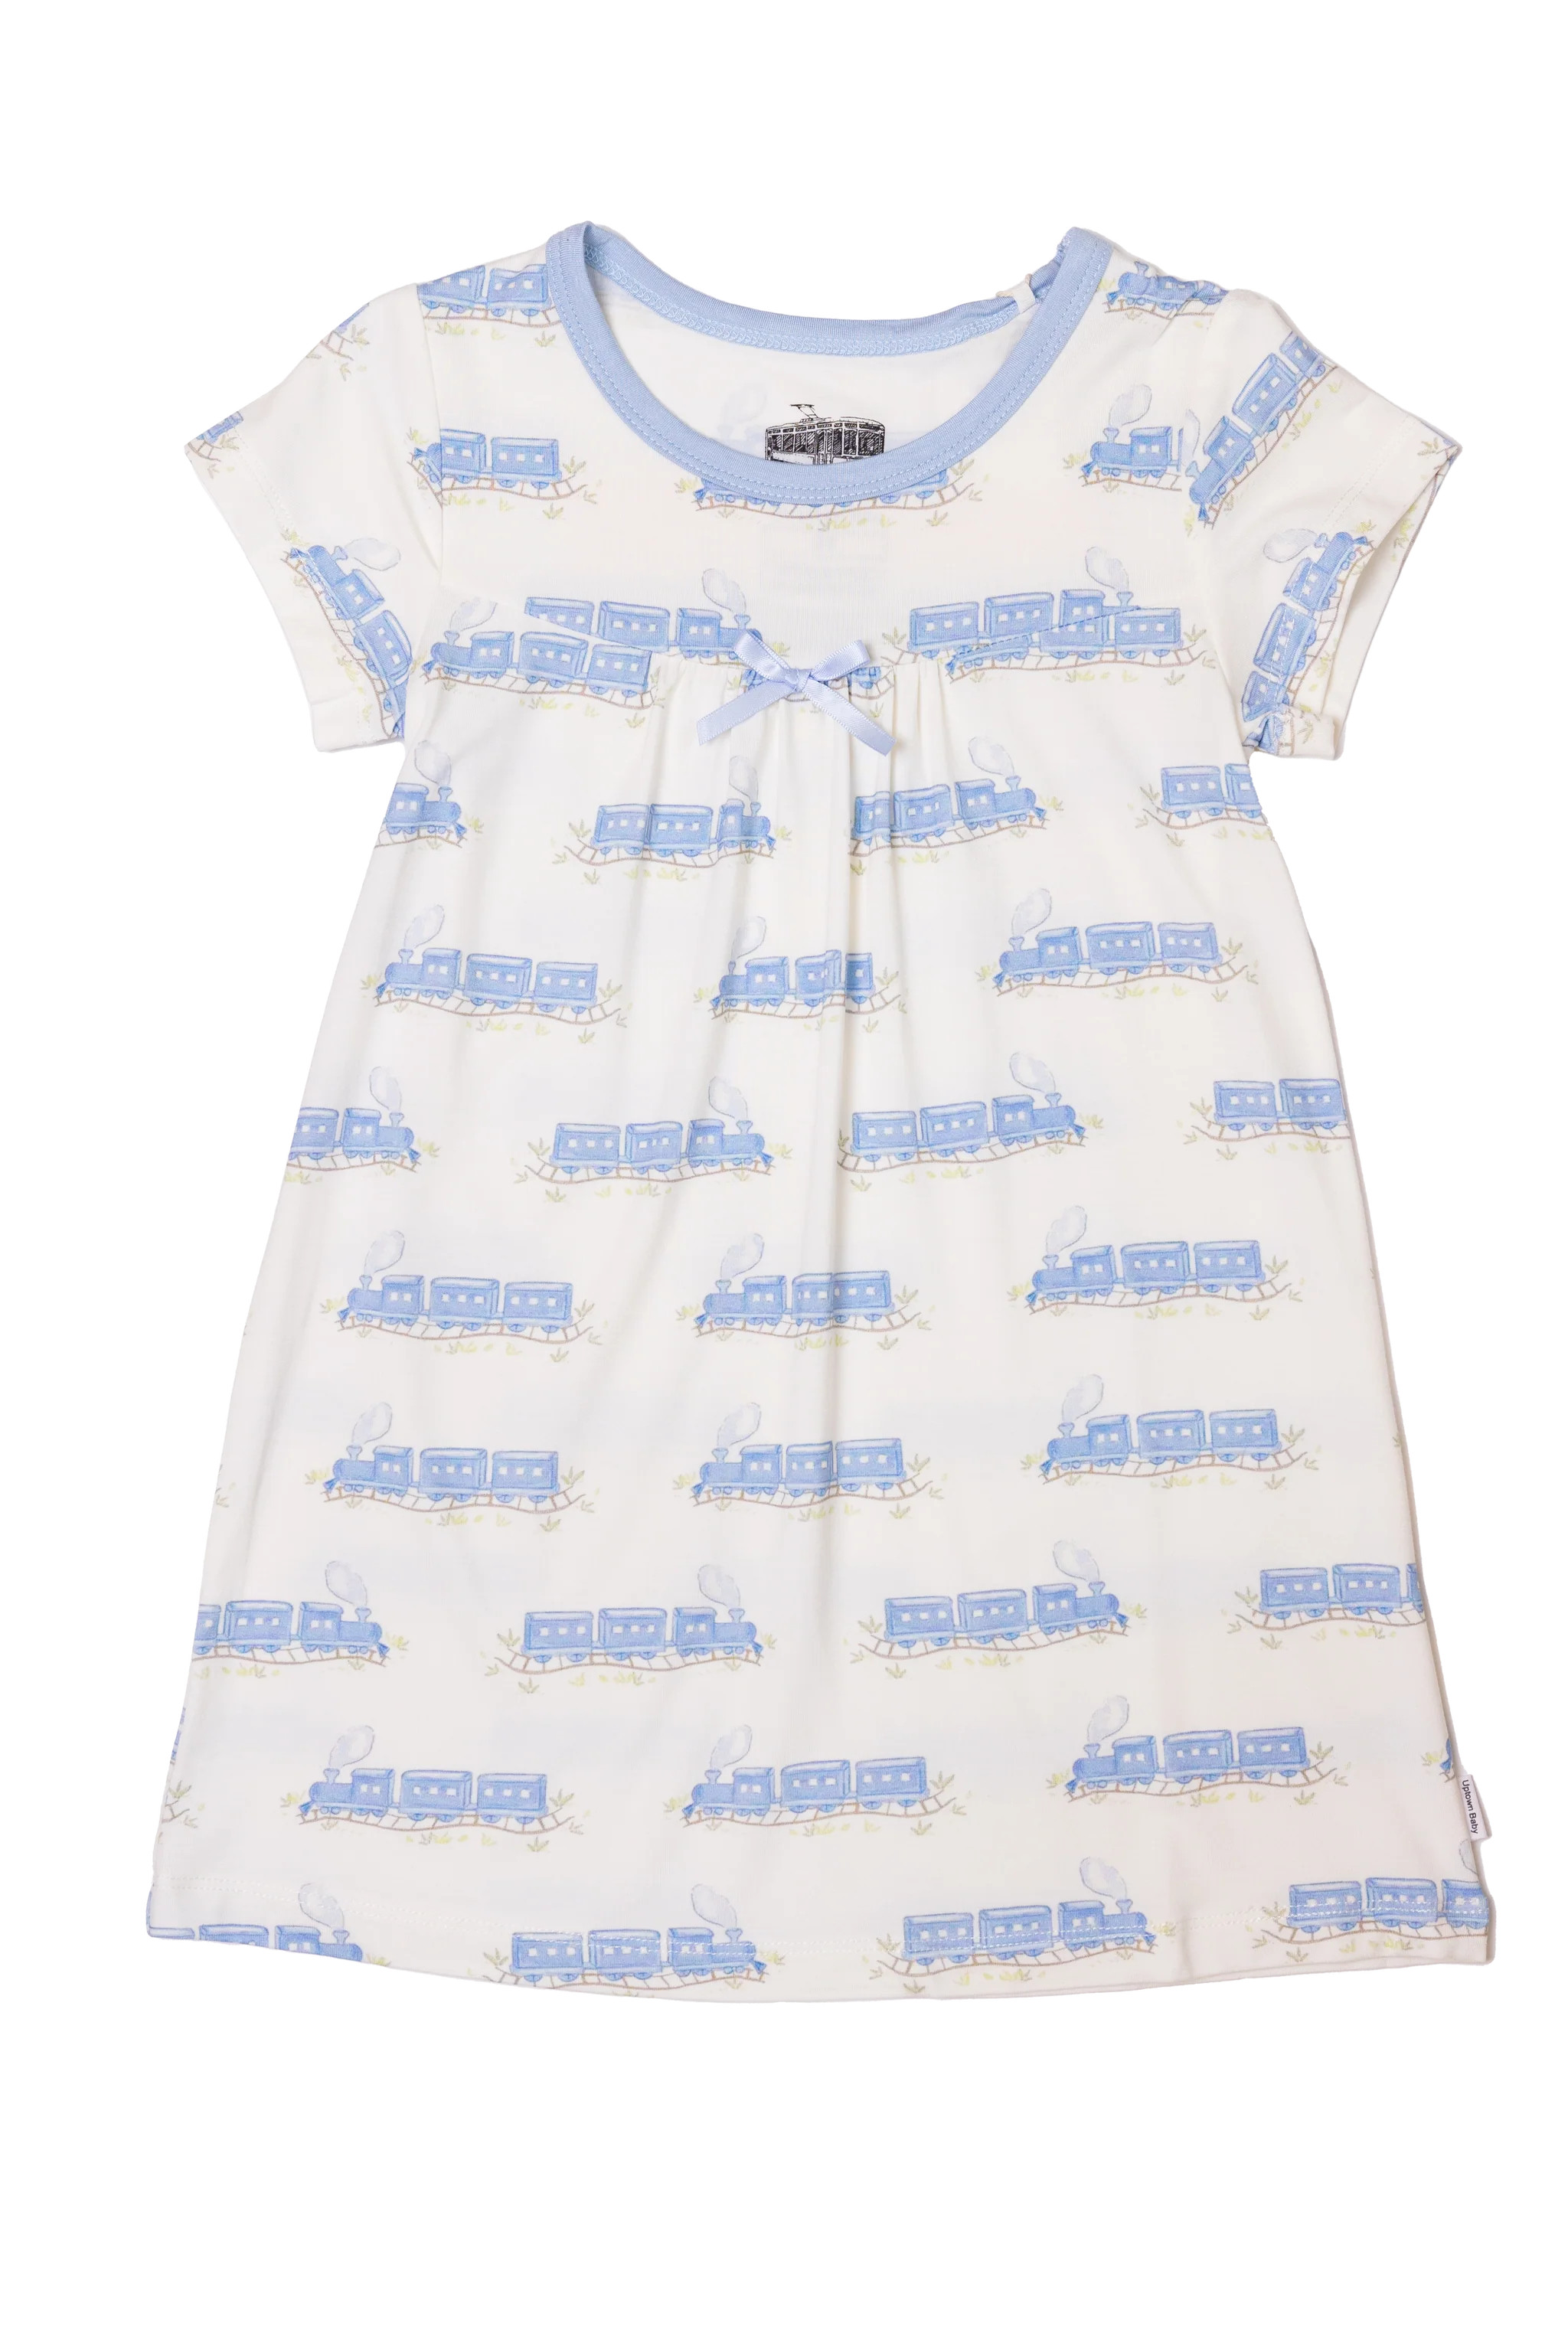 Trains Bamboo Dress | The Uptown Baby